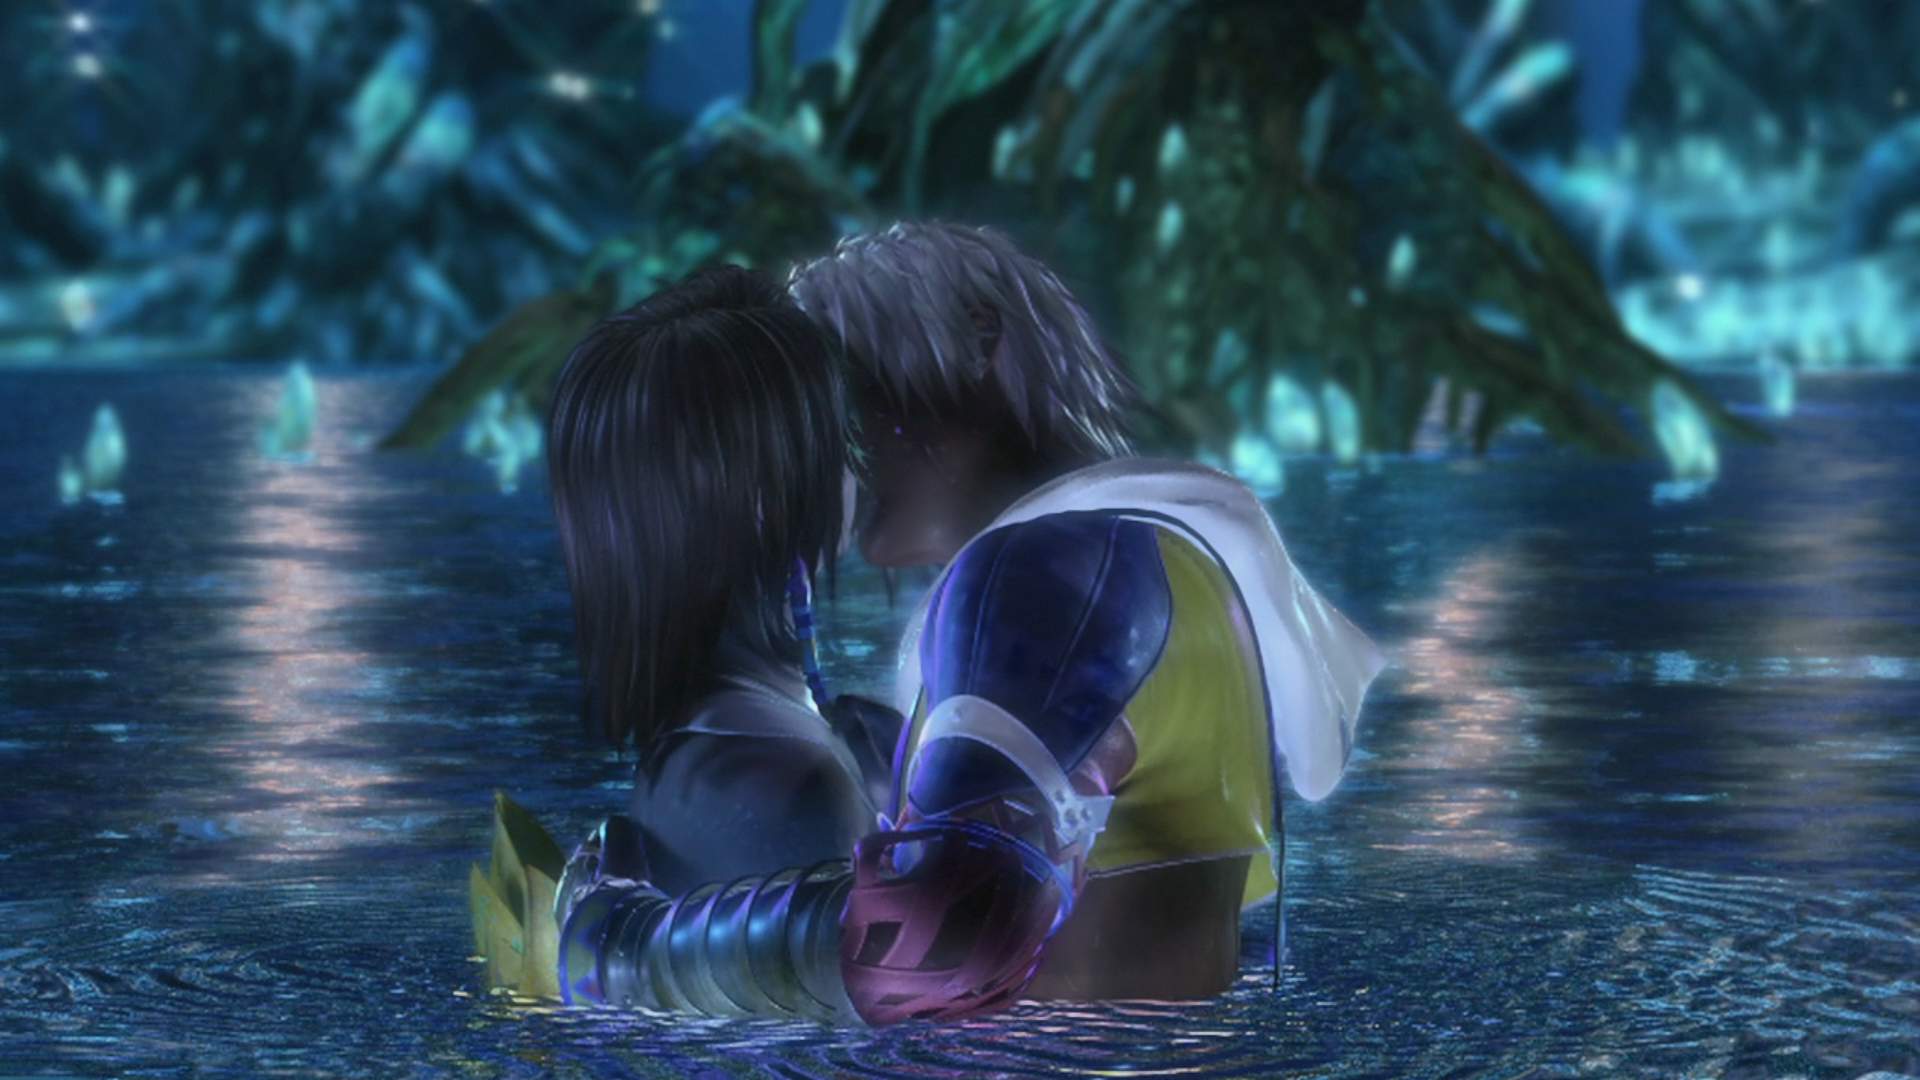 Get Final Fantasy X X 2 Hd Remaster On Nintendo Switch And Xbox One